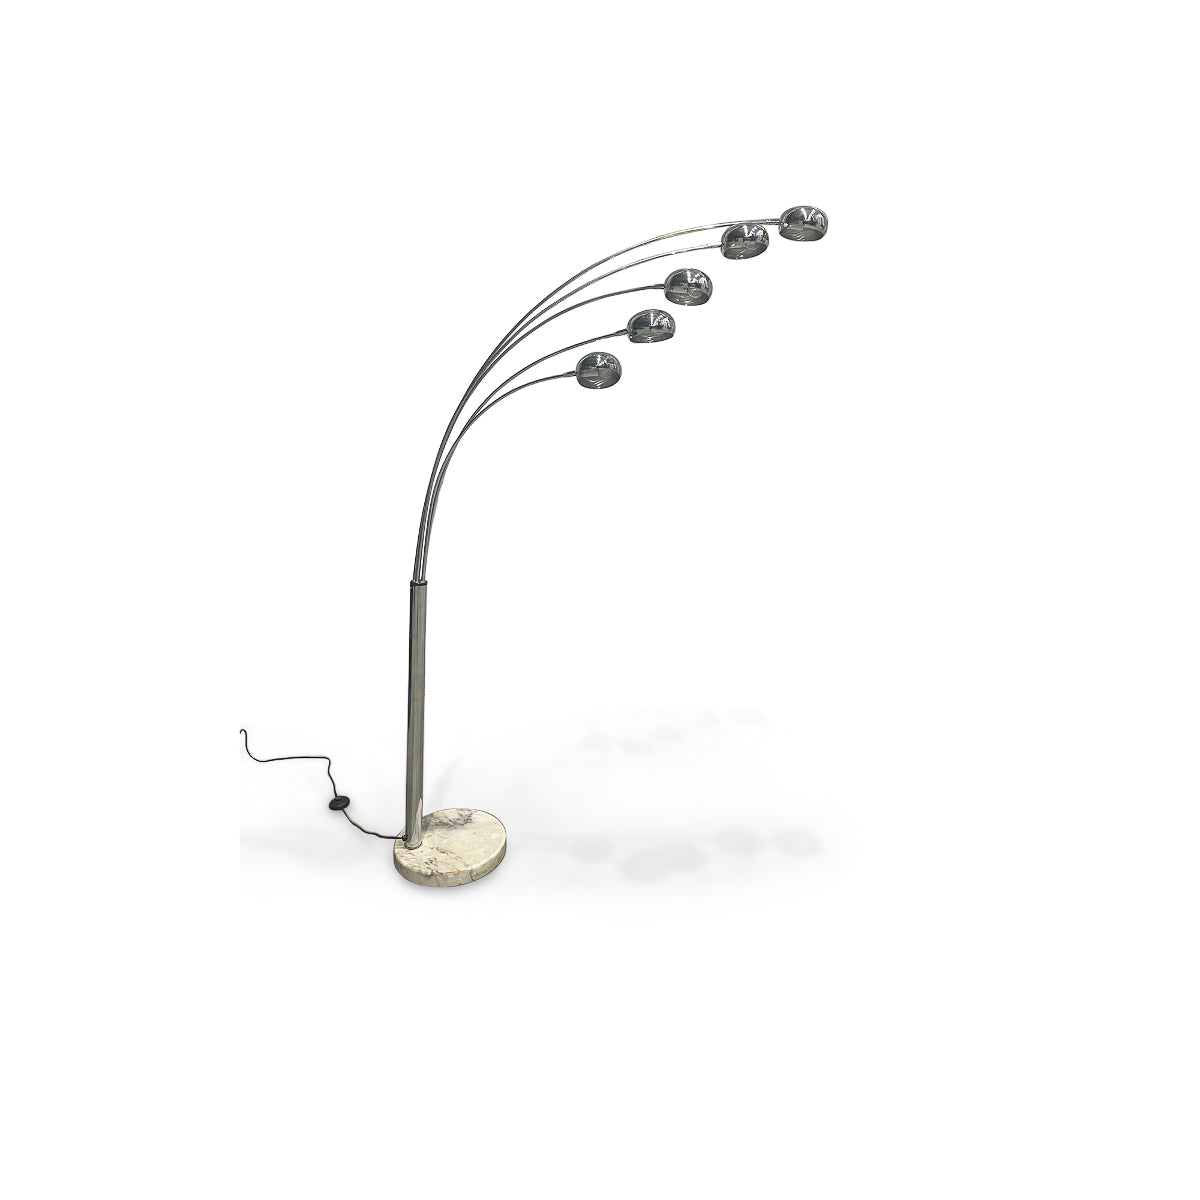 Floor Lamp with Five Bulbs in Chrome, Glass & Marble Unknown, c. 1960- Lot 349